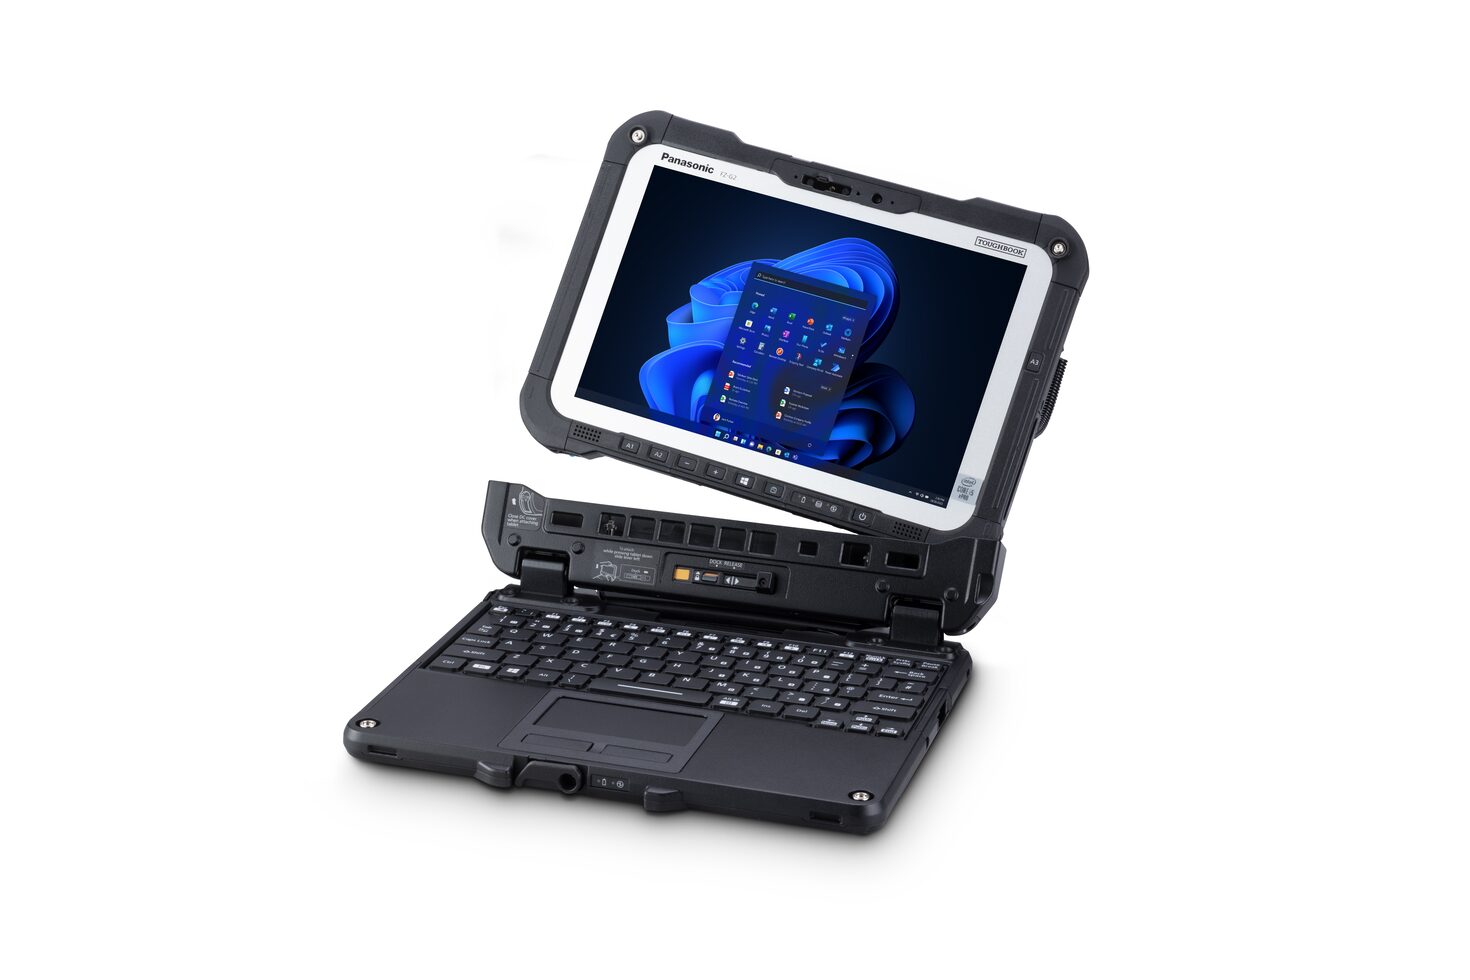 TOUGHBOOK G2 Product image data